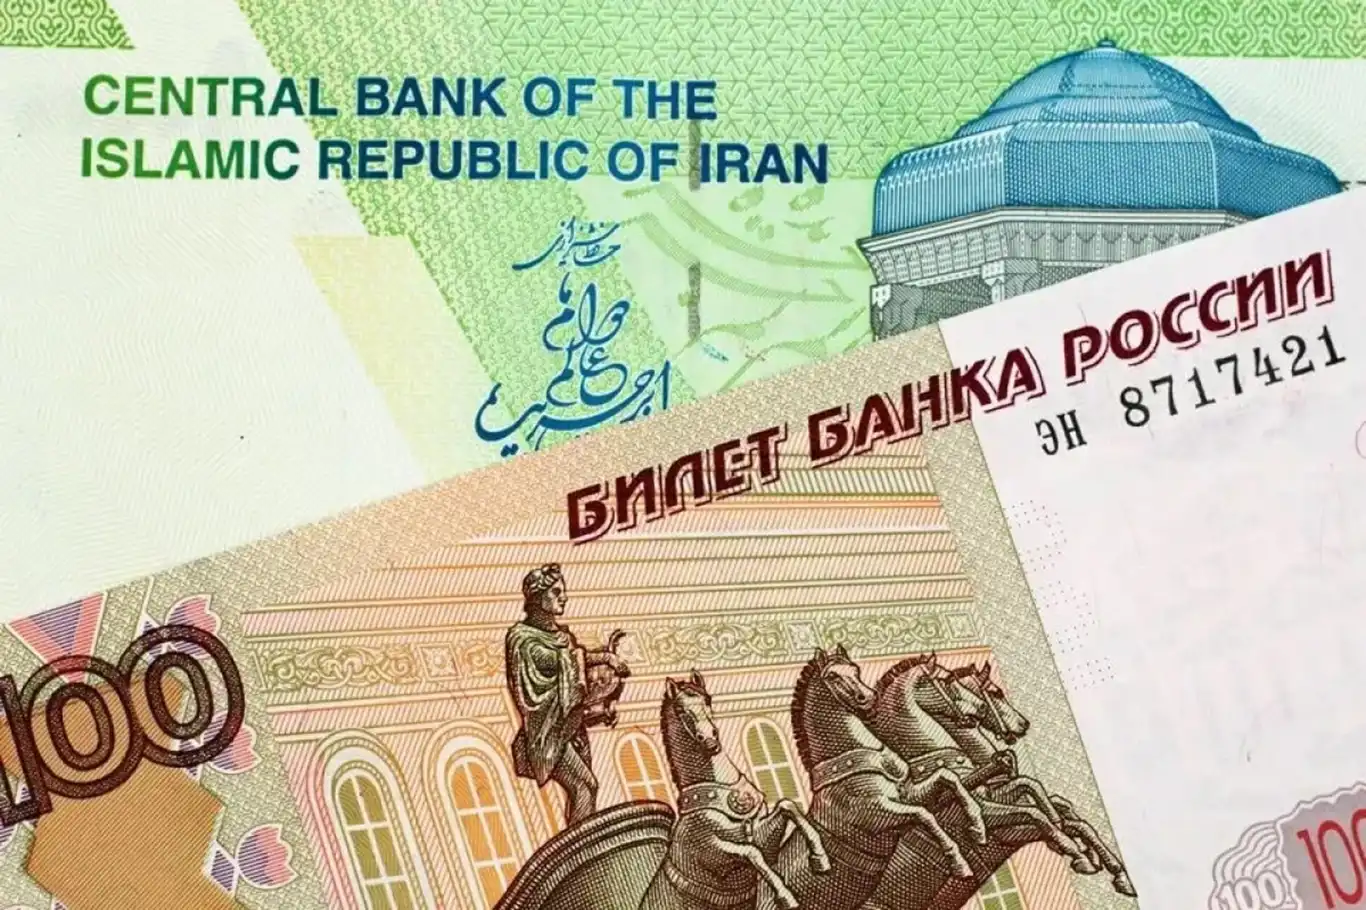 Russia extends 6.5 billion ruble credit line to Iran in landmark financial agreement